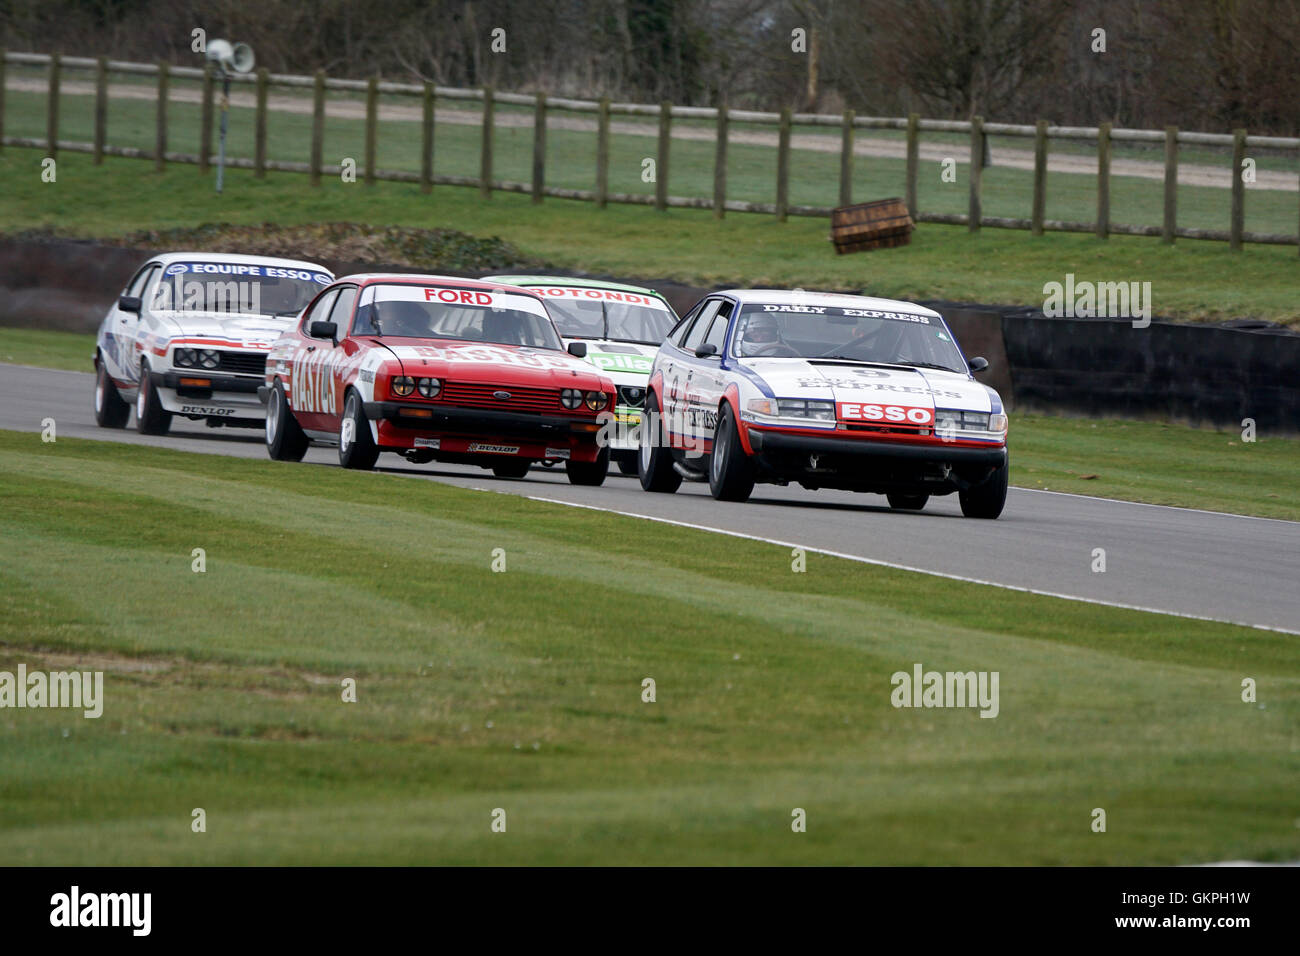 A gaggle of 70's saloon cars cornering hard during the Goodwood Members Meeting Stock Photo